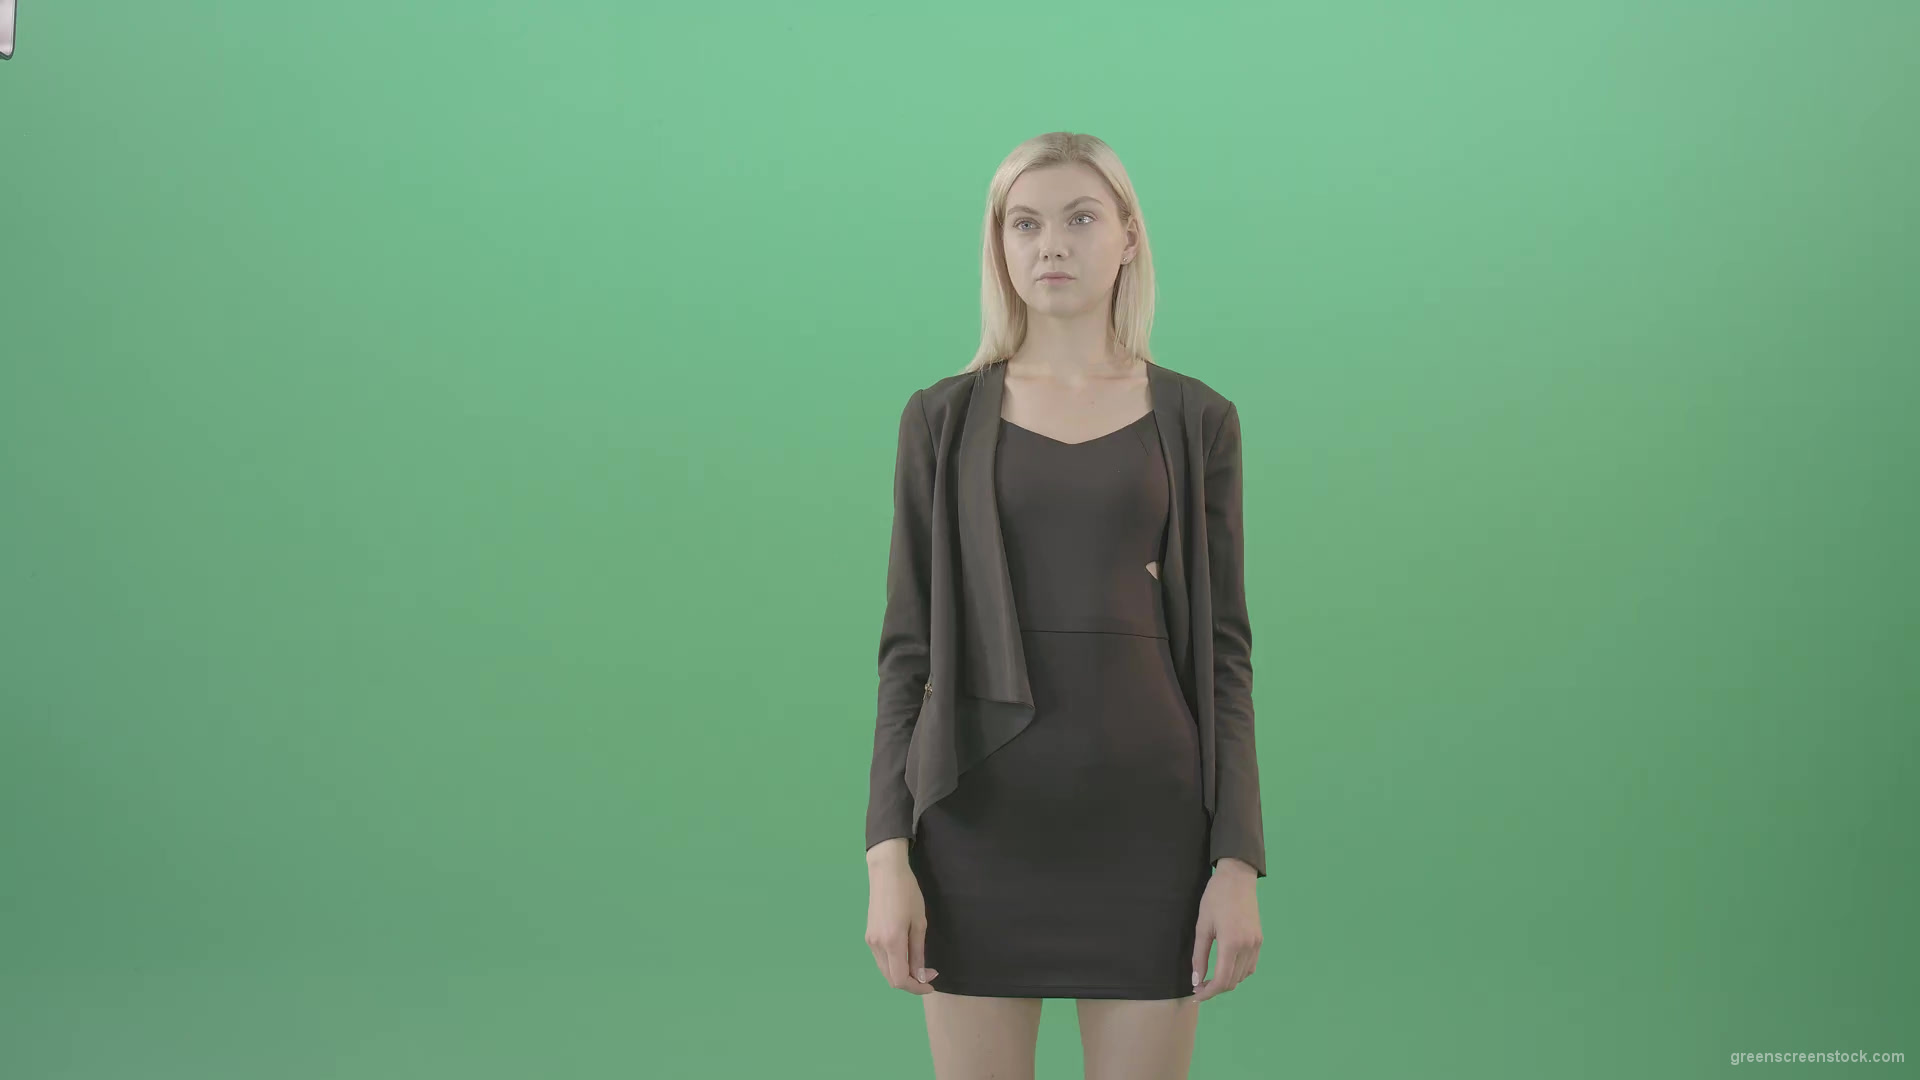 Blondie-shopping-in-virtual-store-on-touch-screen-in-green-screen-studio-4K-Video-Footage-1920_001 Green Screen Stock